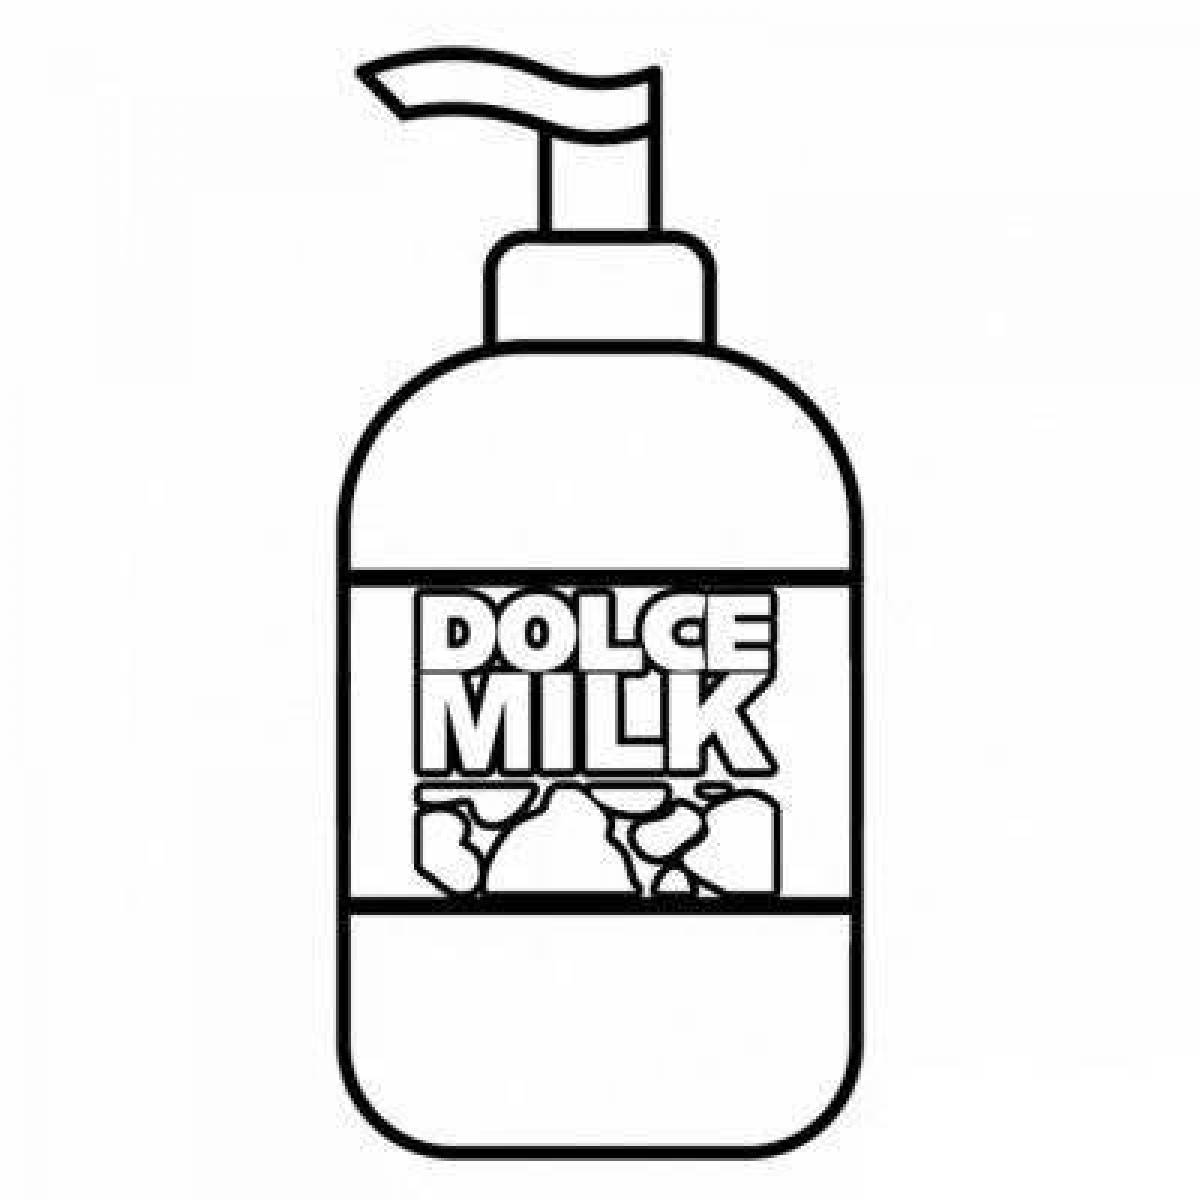 Amazing dolce milk duck coloring page